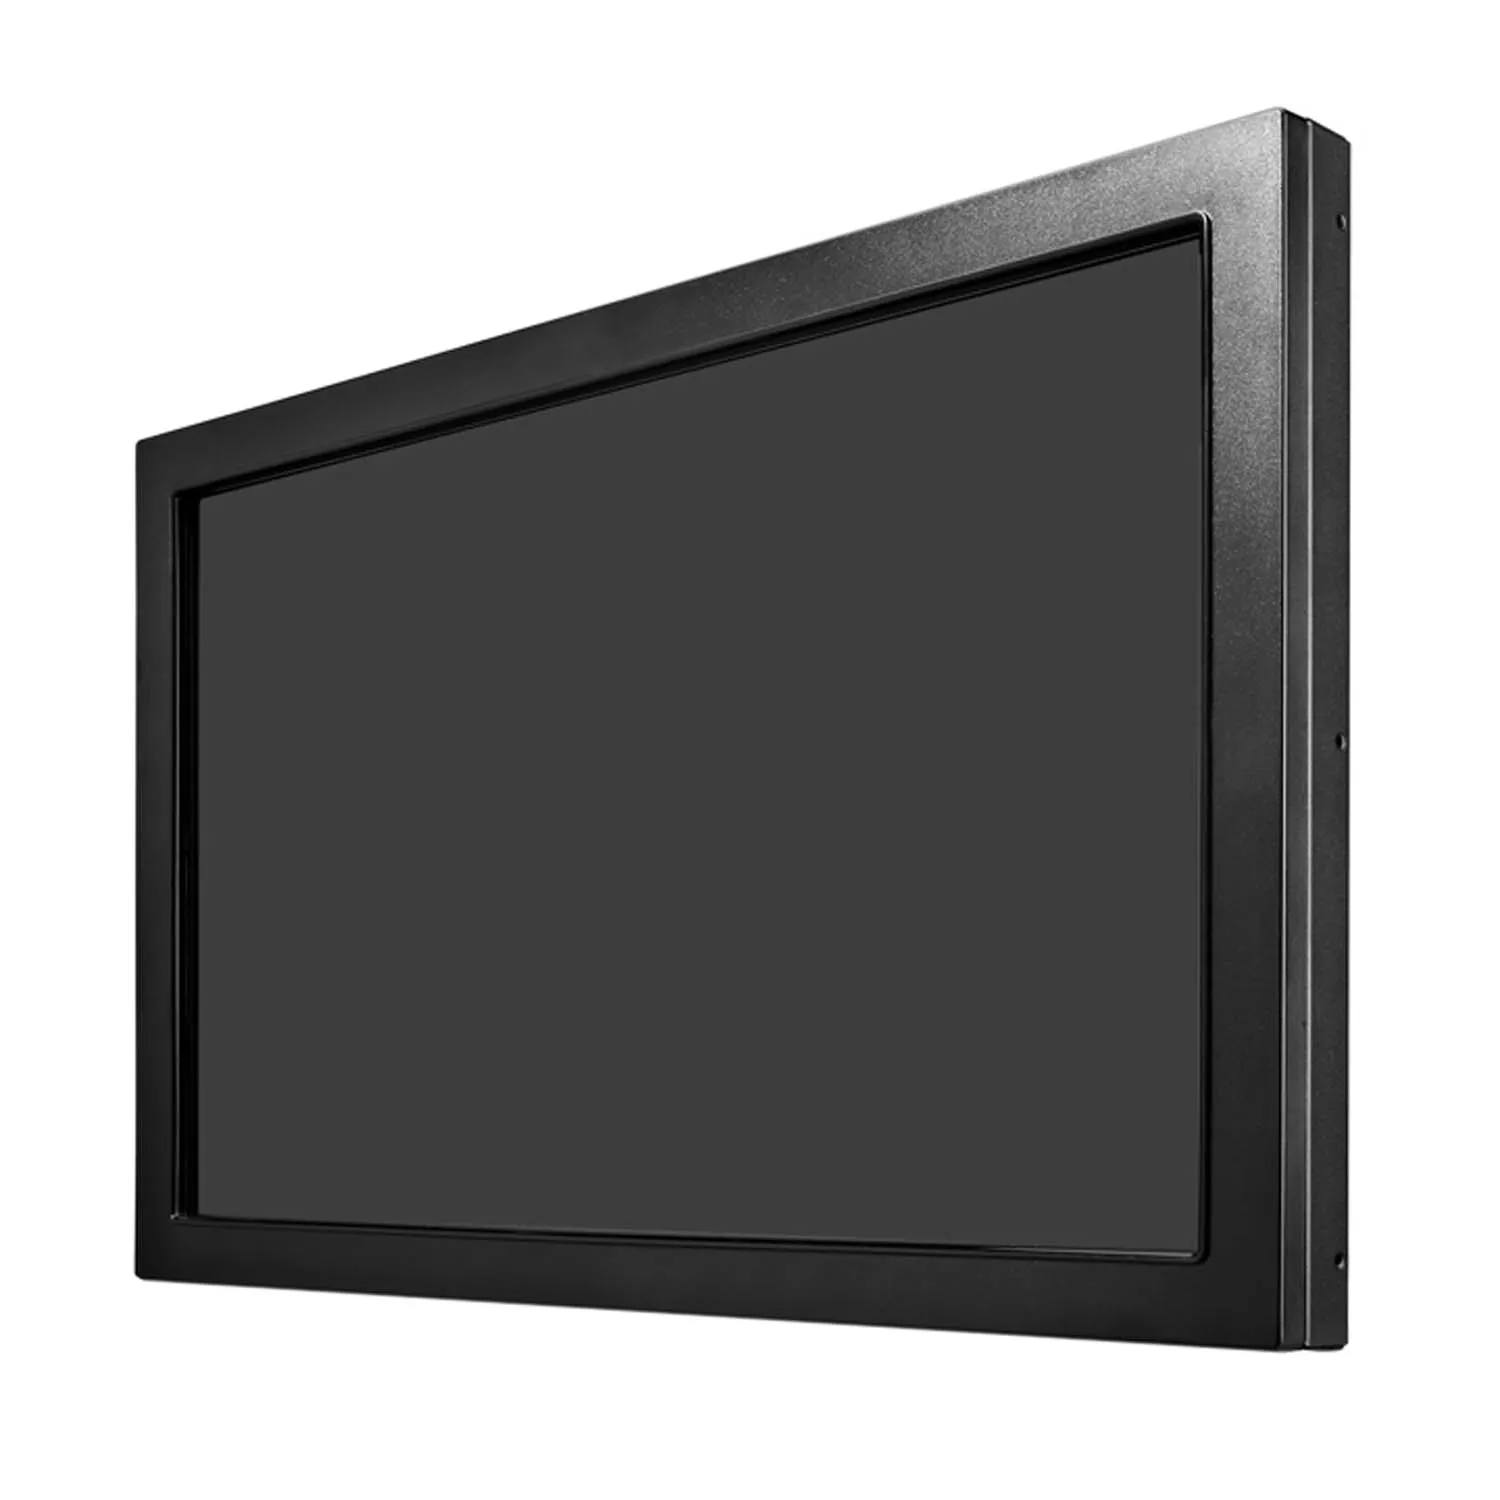 INDUSTRIAL OPEN FRAME NON-TOUCH MONITOR 22" KM-220-NW0S001